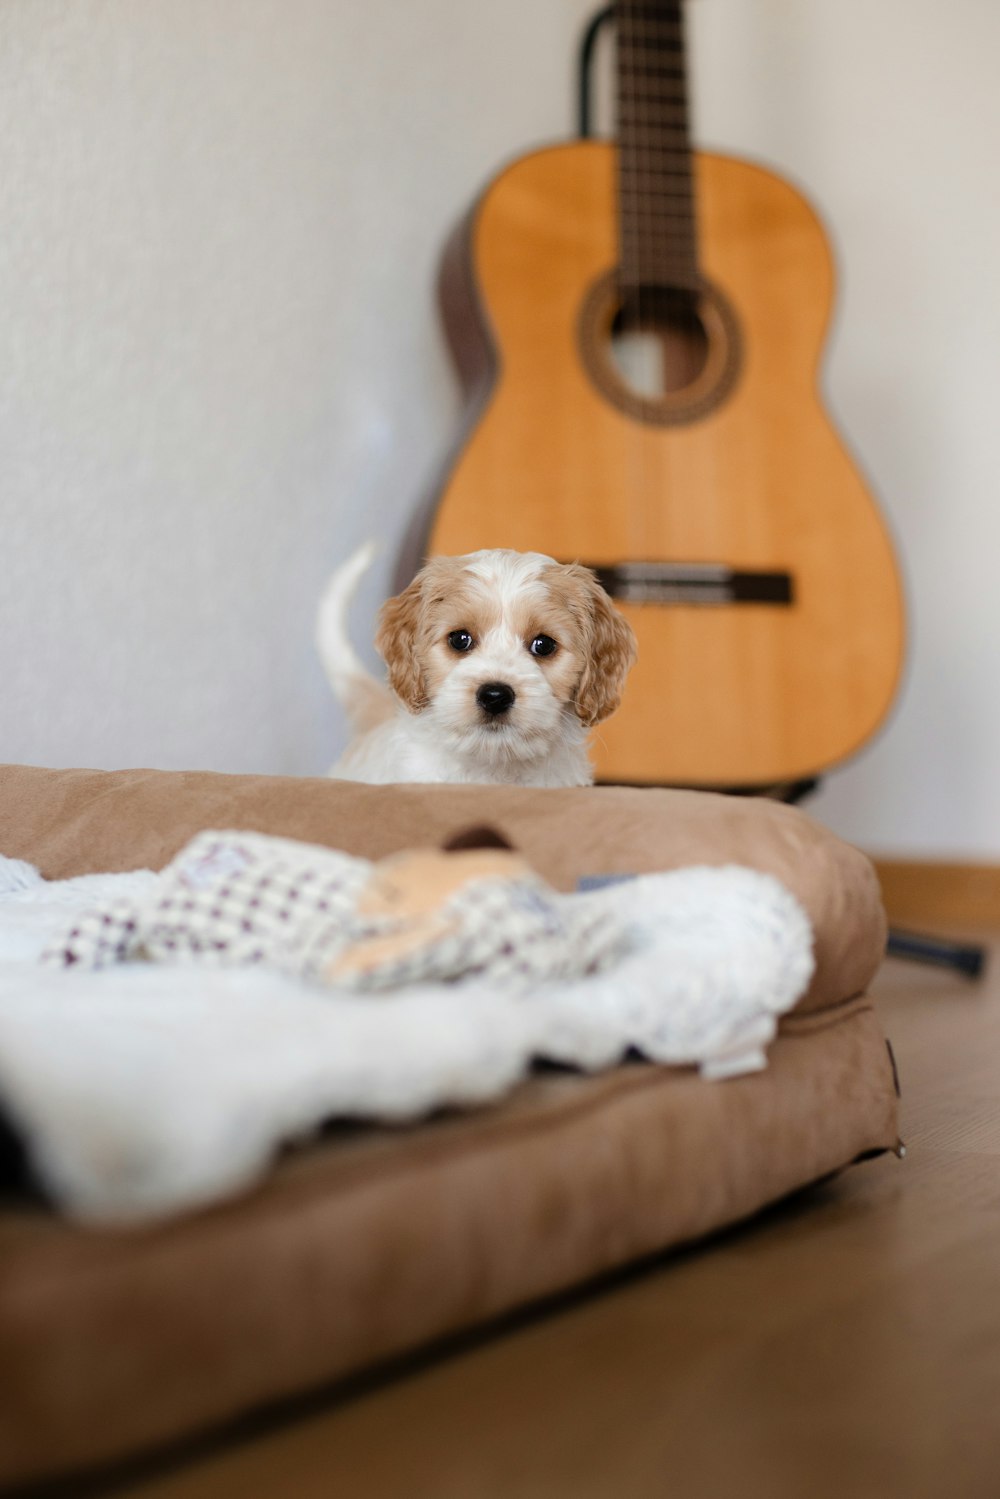 a small dog sitting on a bed next to a guitar